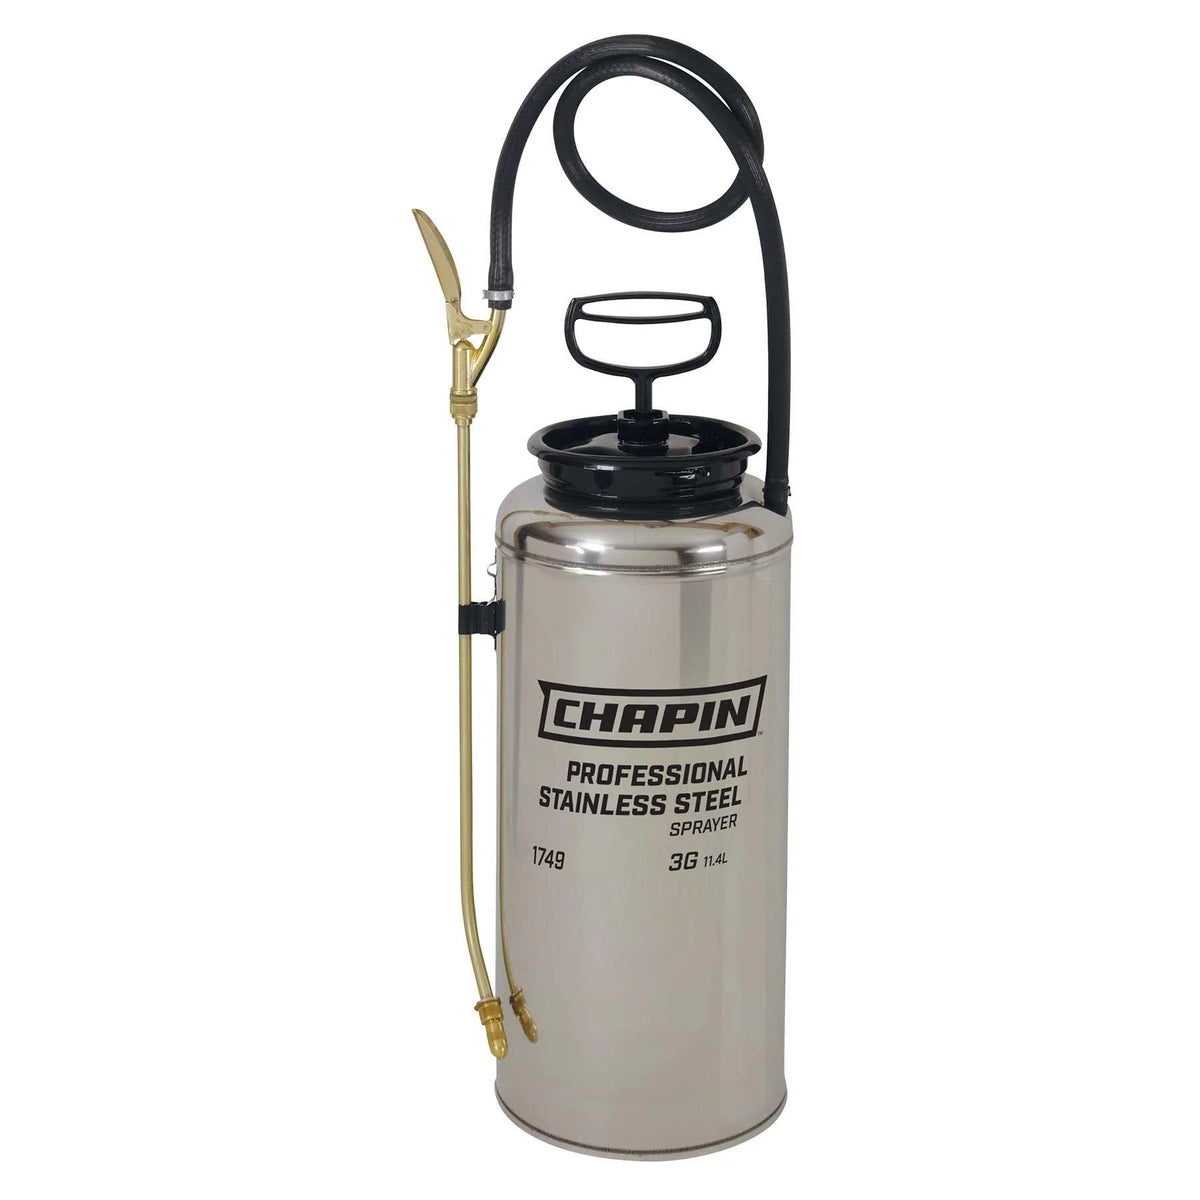 VEVOR 12L Stainless Steel Sprayer w/3' Hose for Pesticide Clean and  Sanitizing